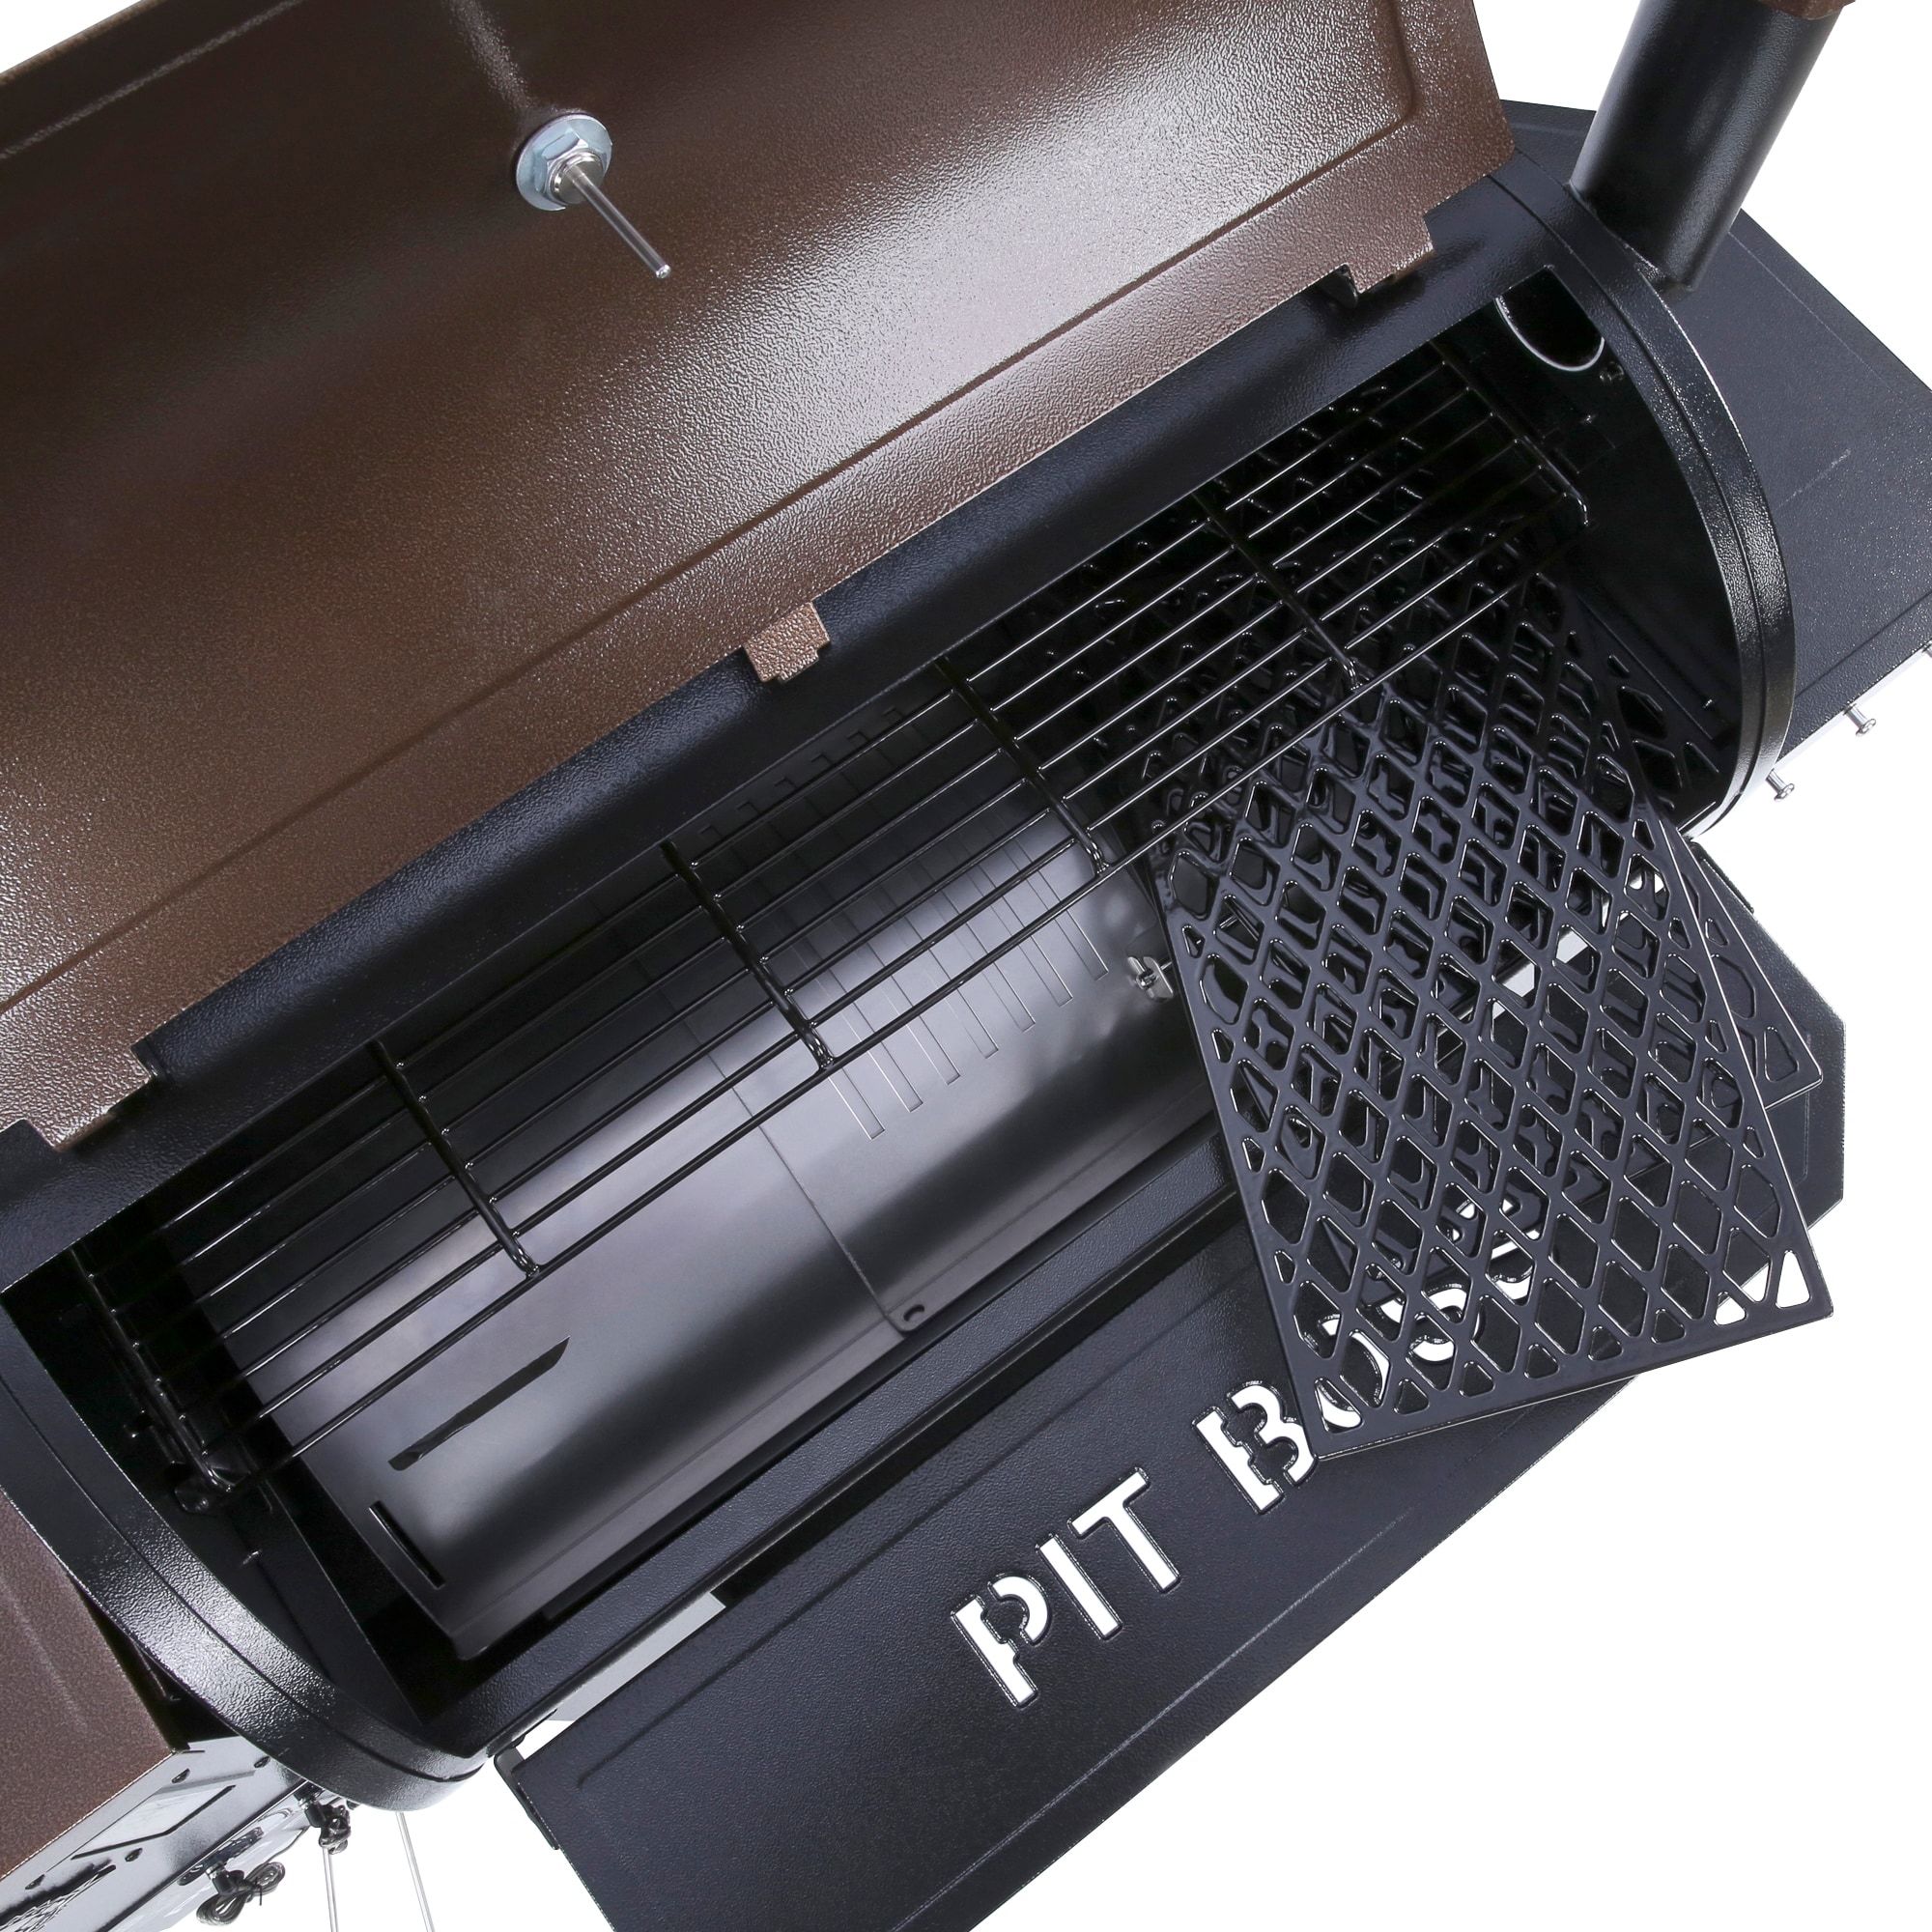 Outdoors : Pit Boss Sportsman 1100 Wood Pellet Grill - 1121 squ in of  cooking Space PBPEL110010566 10566